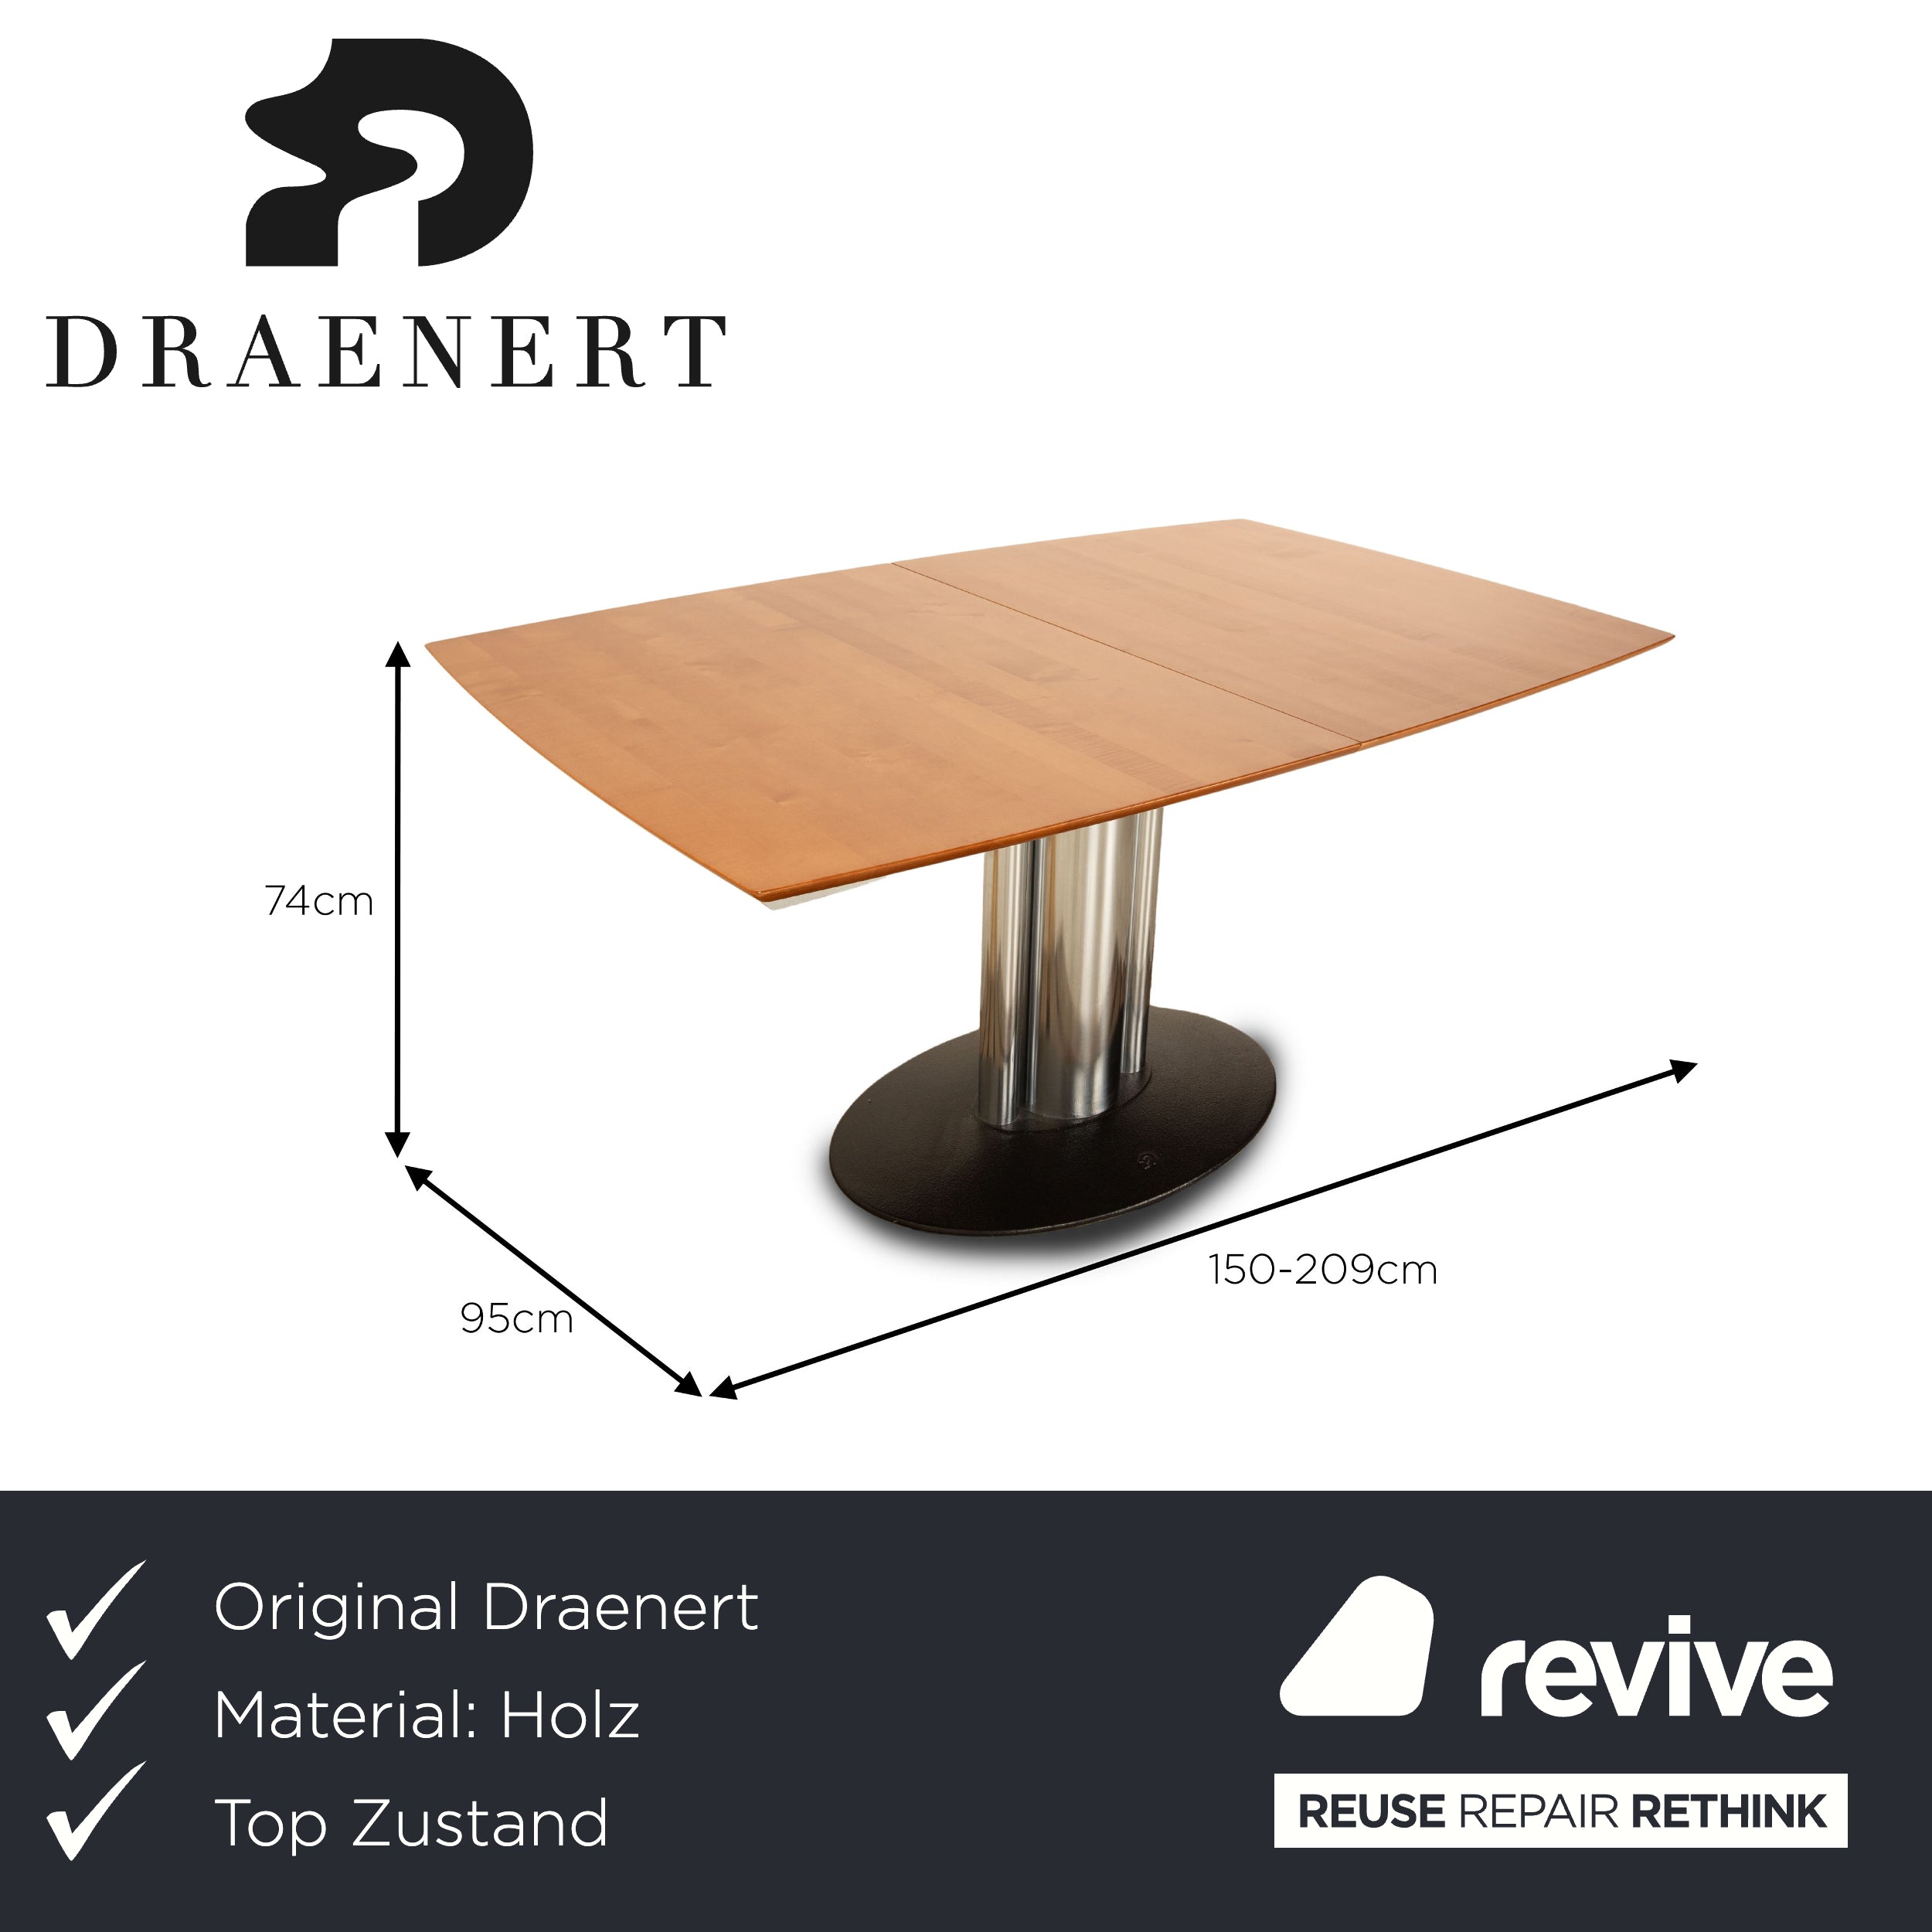 Draenert Adler 2 No. 1224 wooden dining table brown maple extendable function 150/209 x 74 x 95